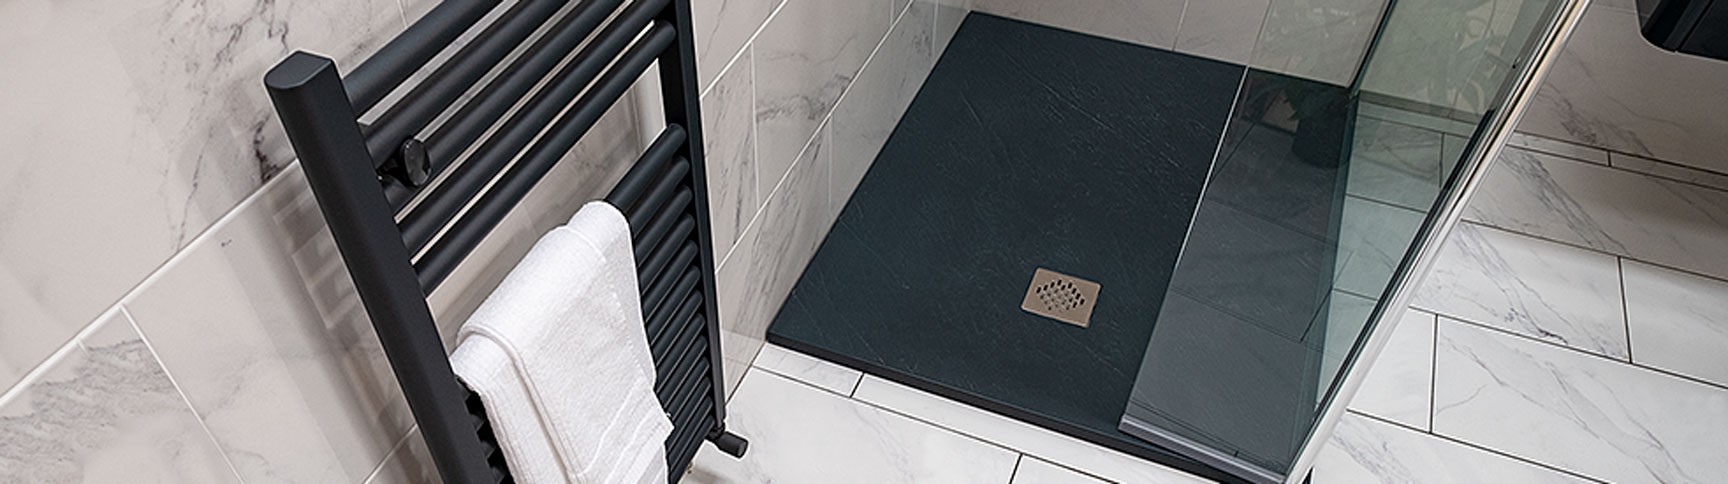 Wet Room Drainage | Shower Drains | Channel Drains | World of Tiles, Bathrooms & Wood Flooring